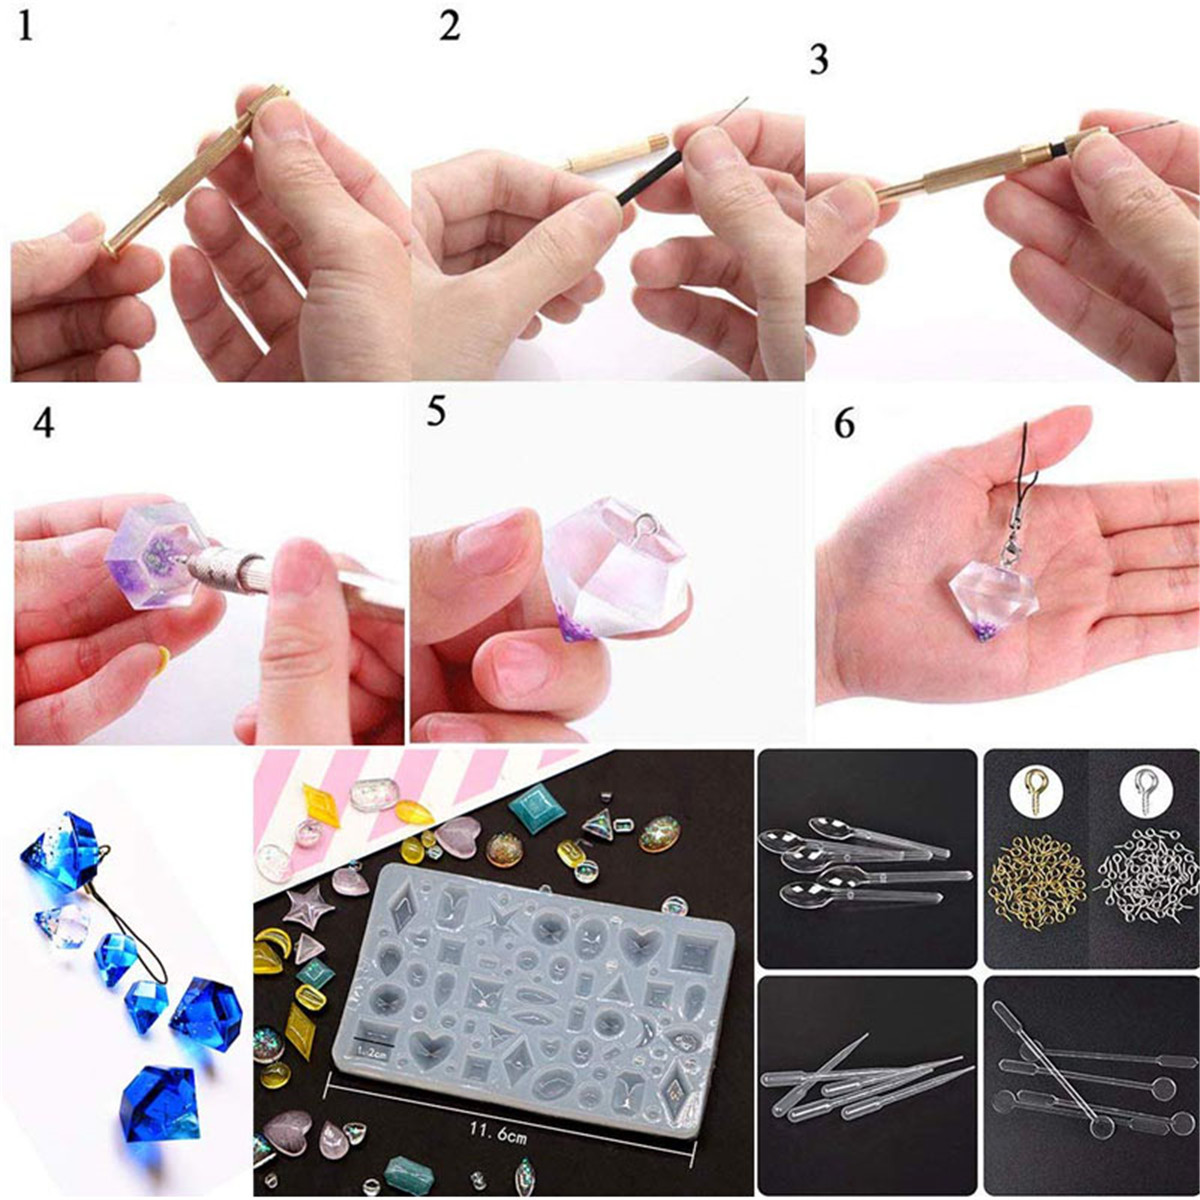 285Pcs-Resin-Casting-Molds-Kit-Silicone-Making-Jewelry-DIY-Pendant-Craft-Mould-Tools-Kit-1808480-2